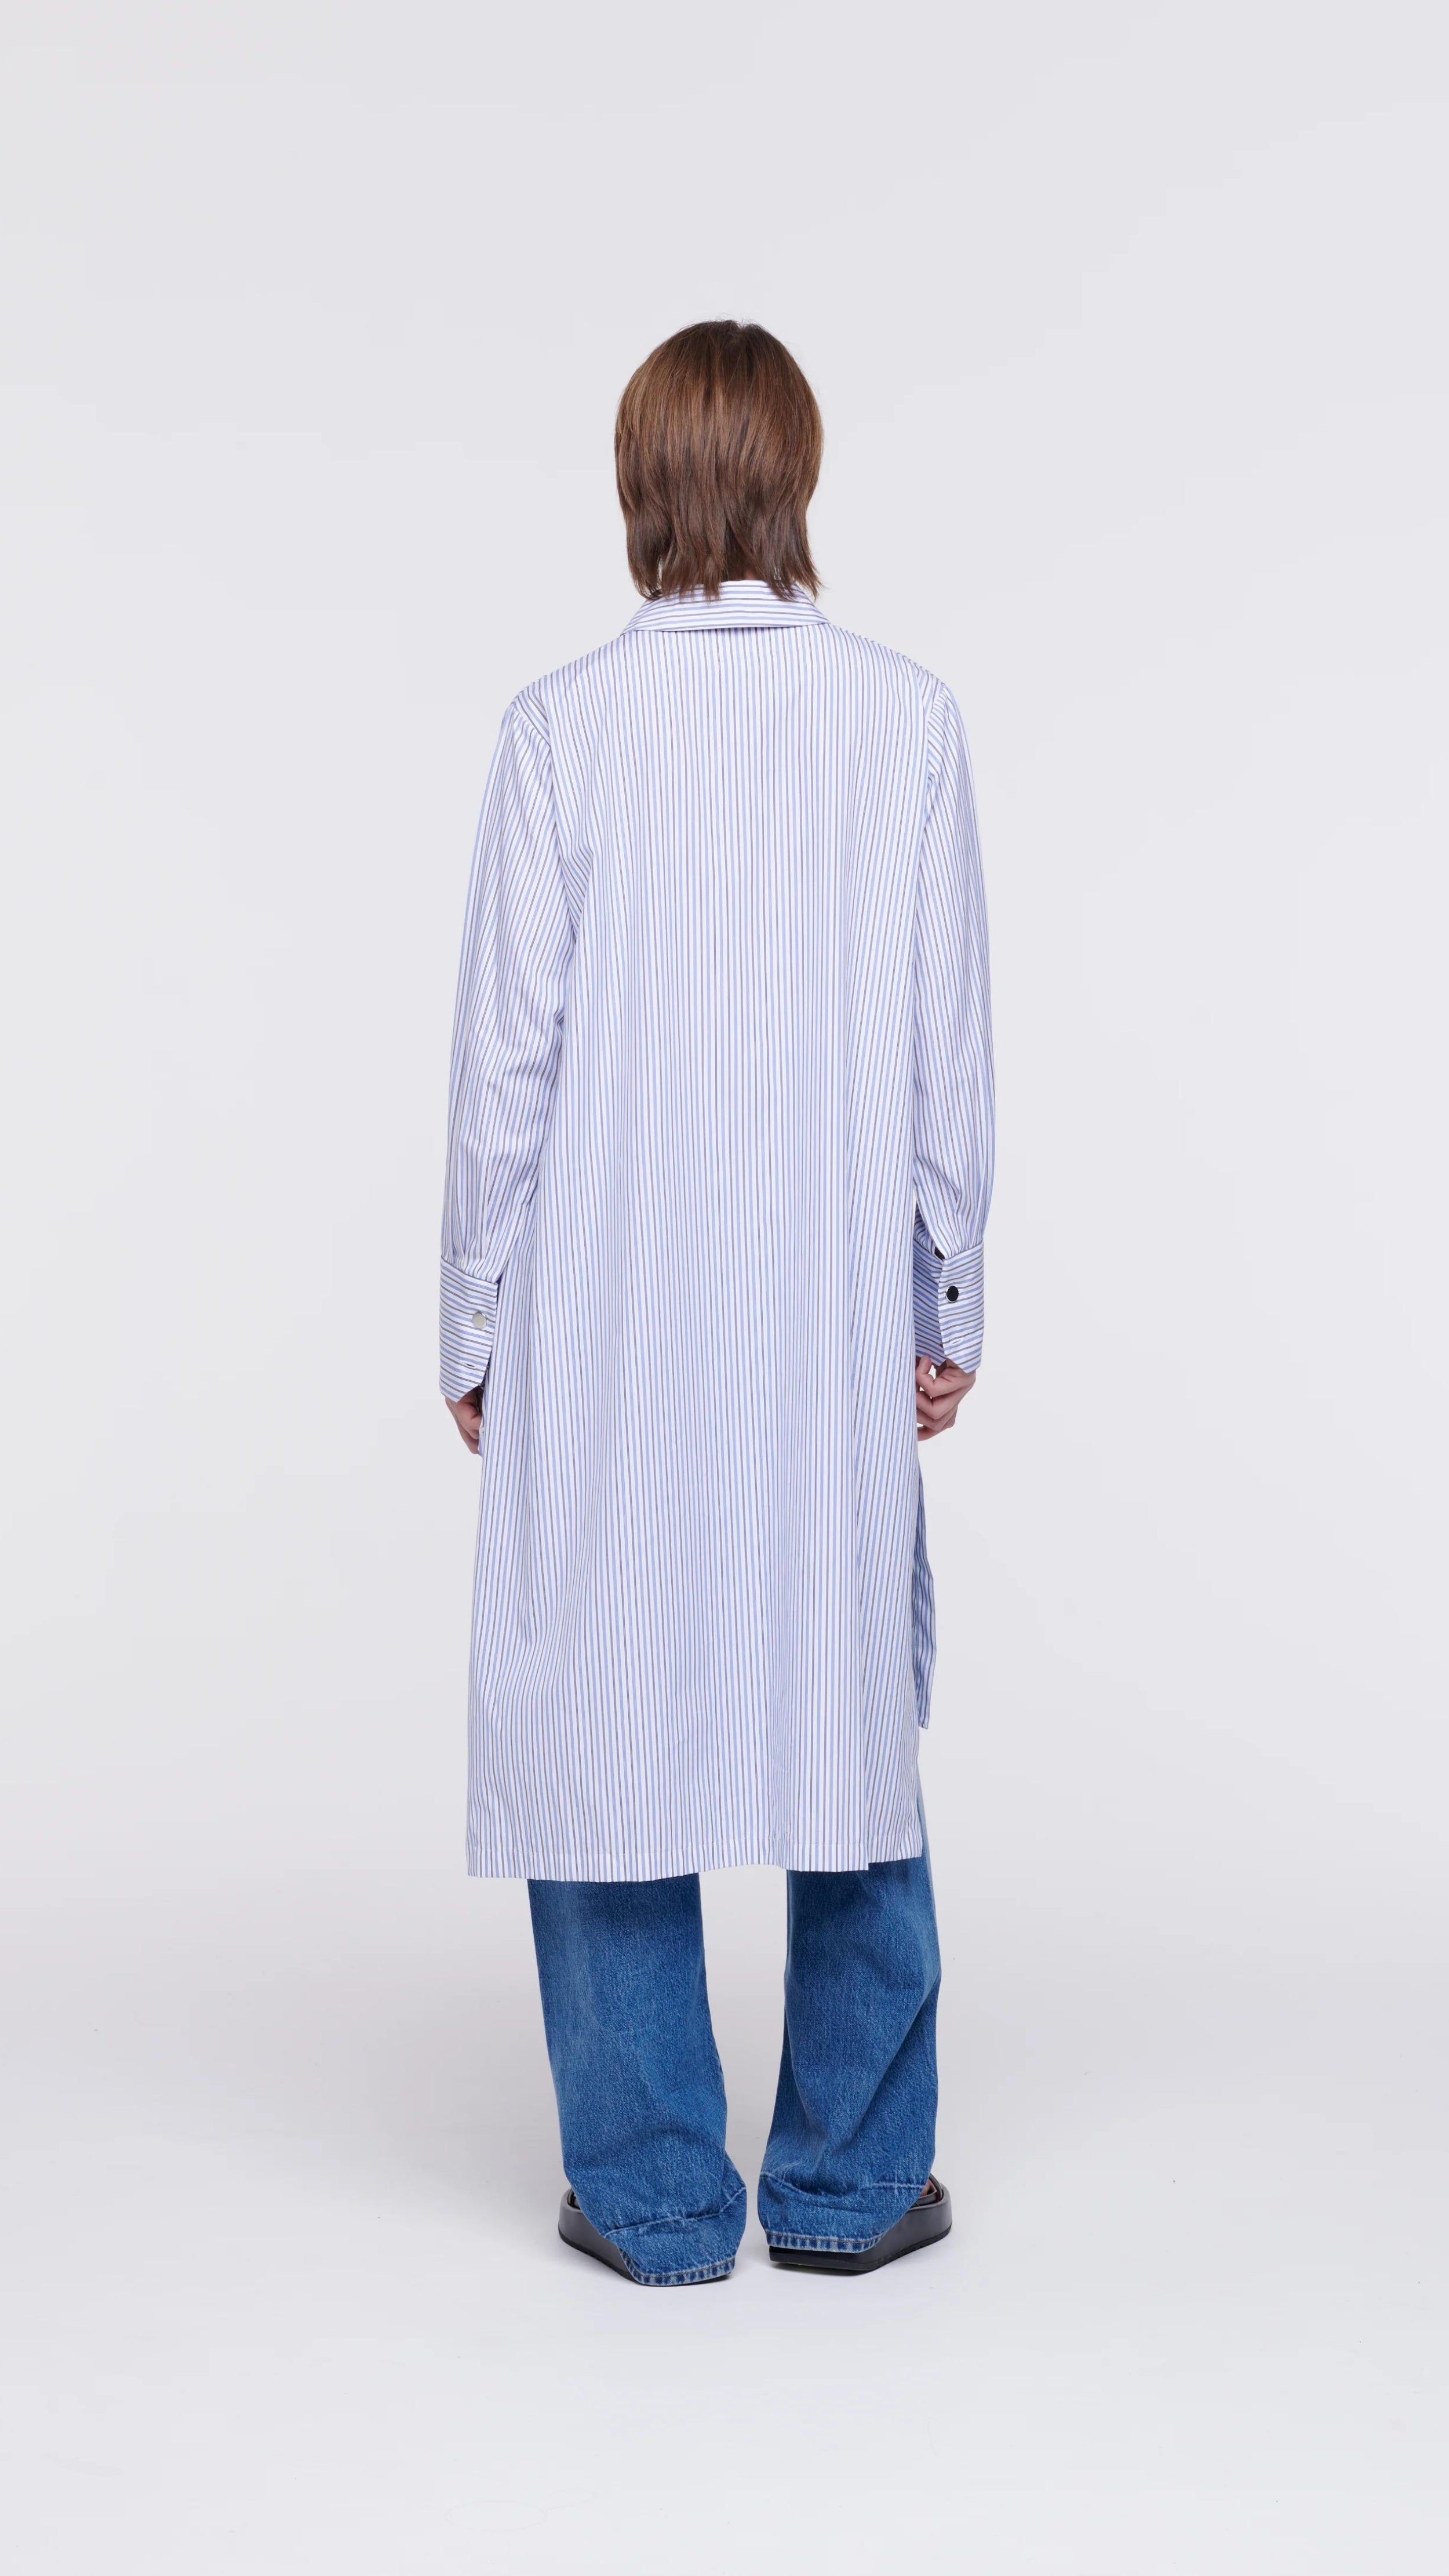 Plan C Striped Cotton Poplin Shirt Dress Classic yet modern shirt dress made from soft cotton poplin in pale blue and white stripes. It has three silver buttons, a collared neckline, long cuffs, and a breast pocket. It&#39;s designed with a relaxed fit and side pockets. Shown on model facing back